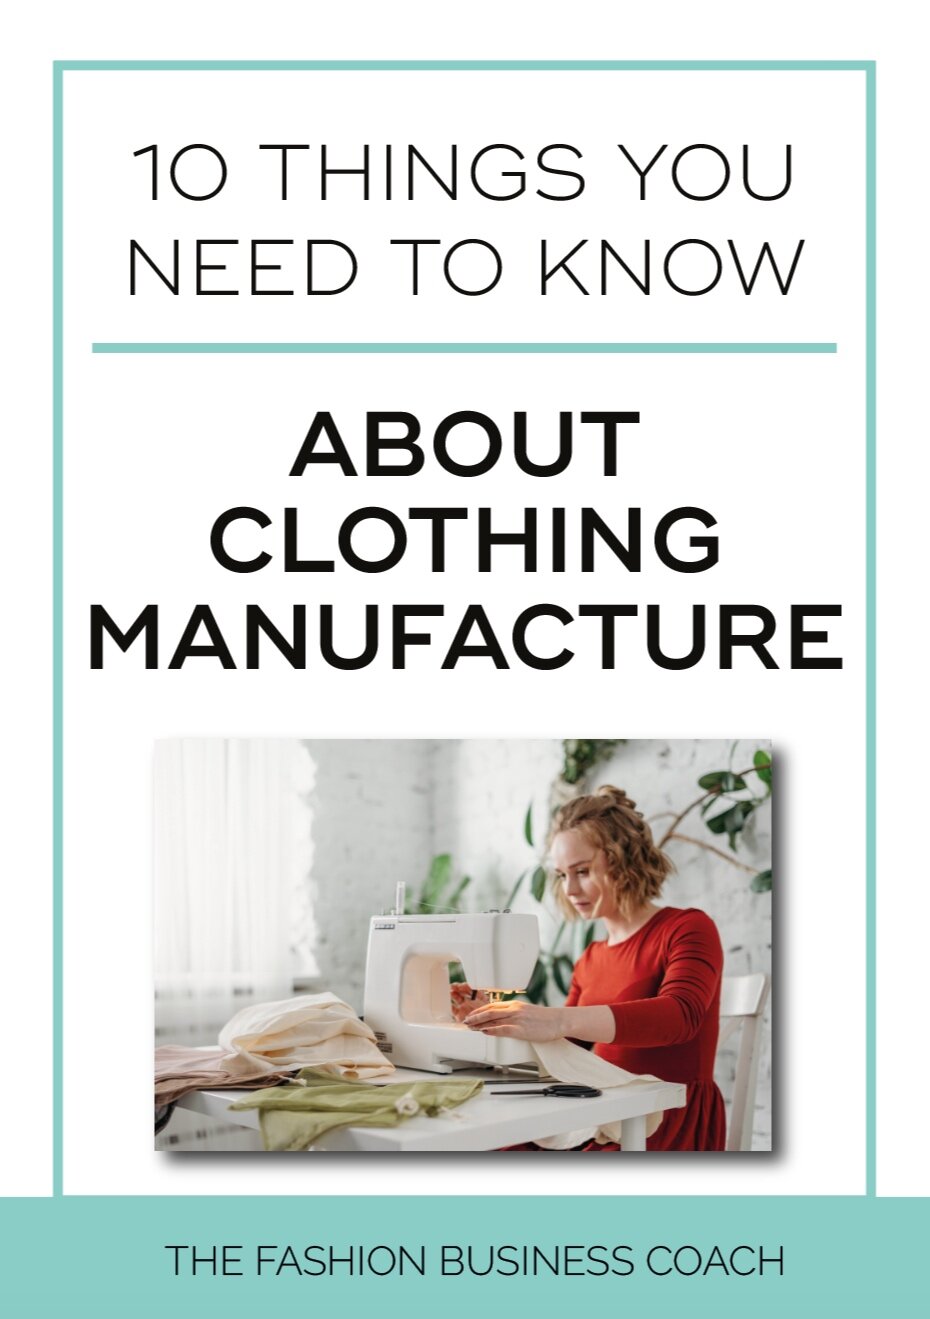 Apparel+maunfacture+terms+you+need+to+know+7.jpg